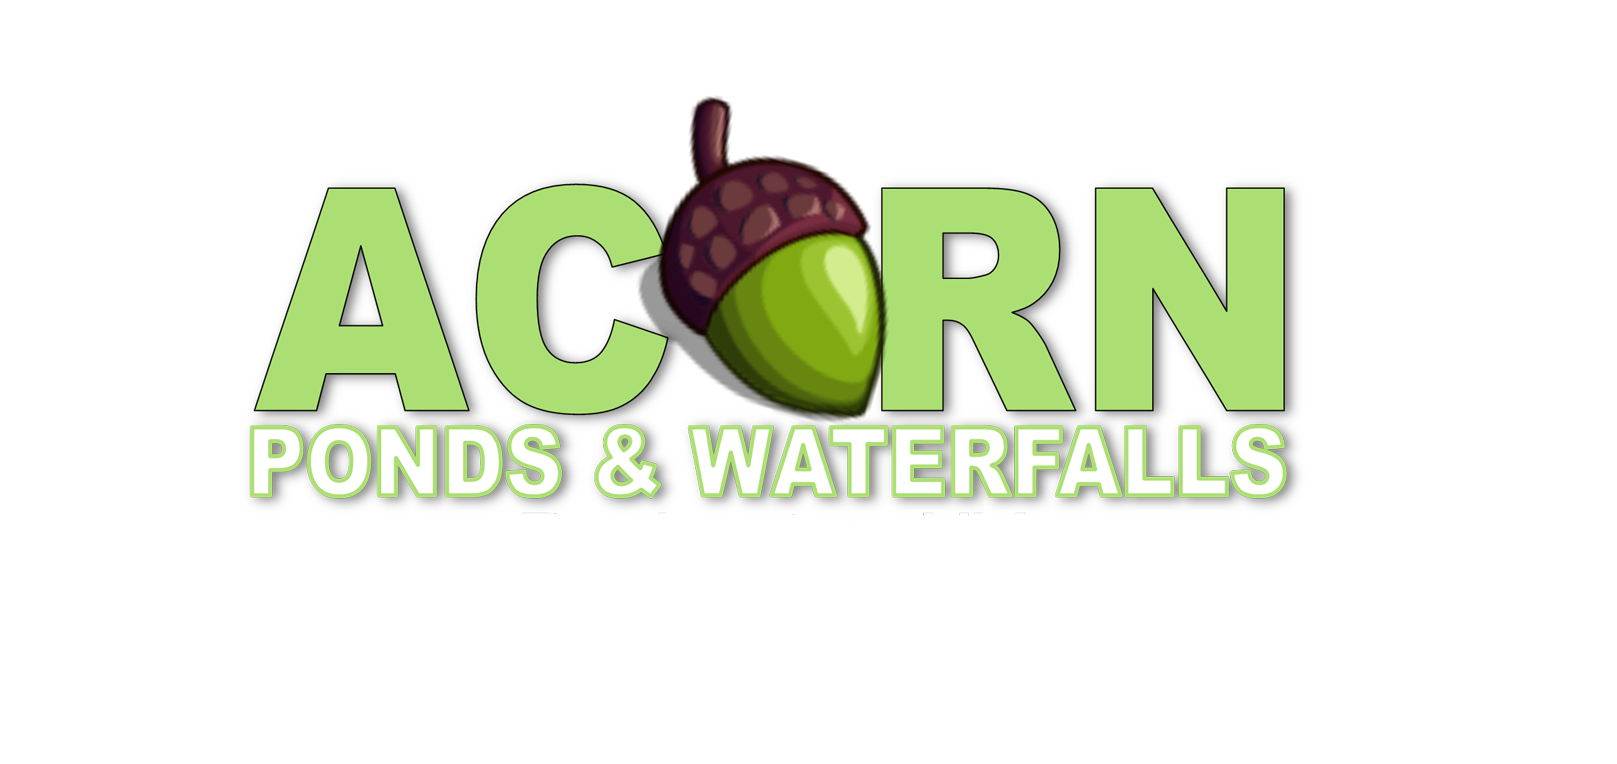 Hire A Certified Pond Contractor To Fix Your Pond or Waterfall Leak! ACORN